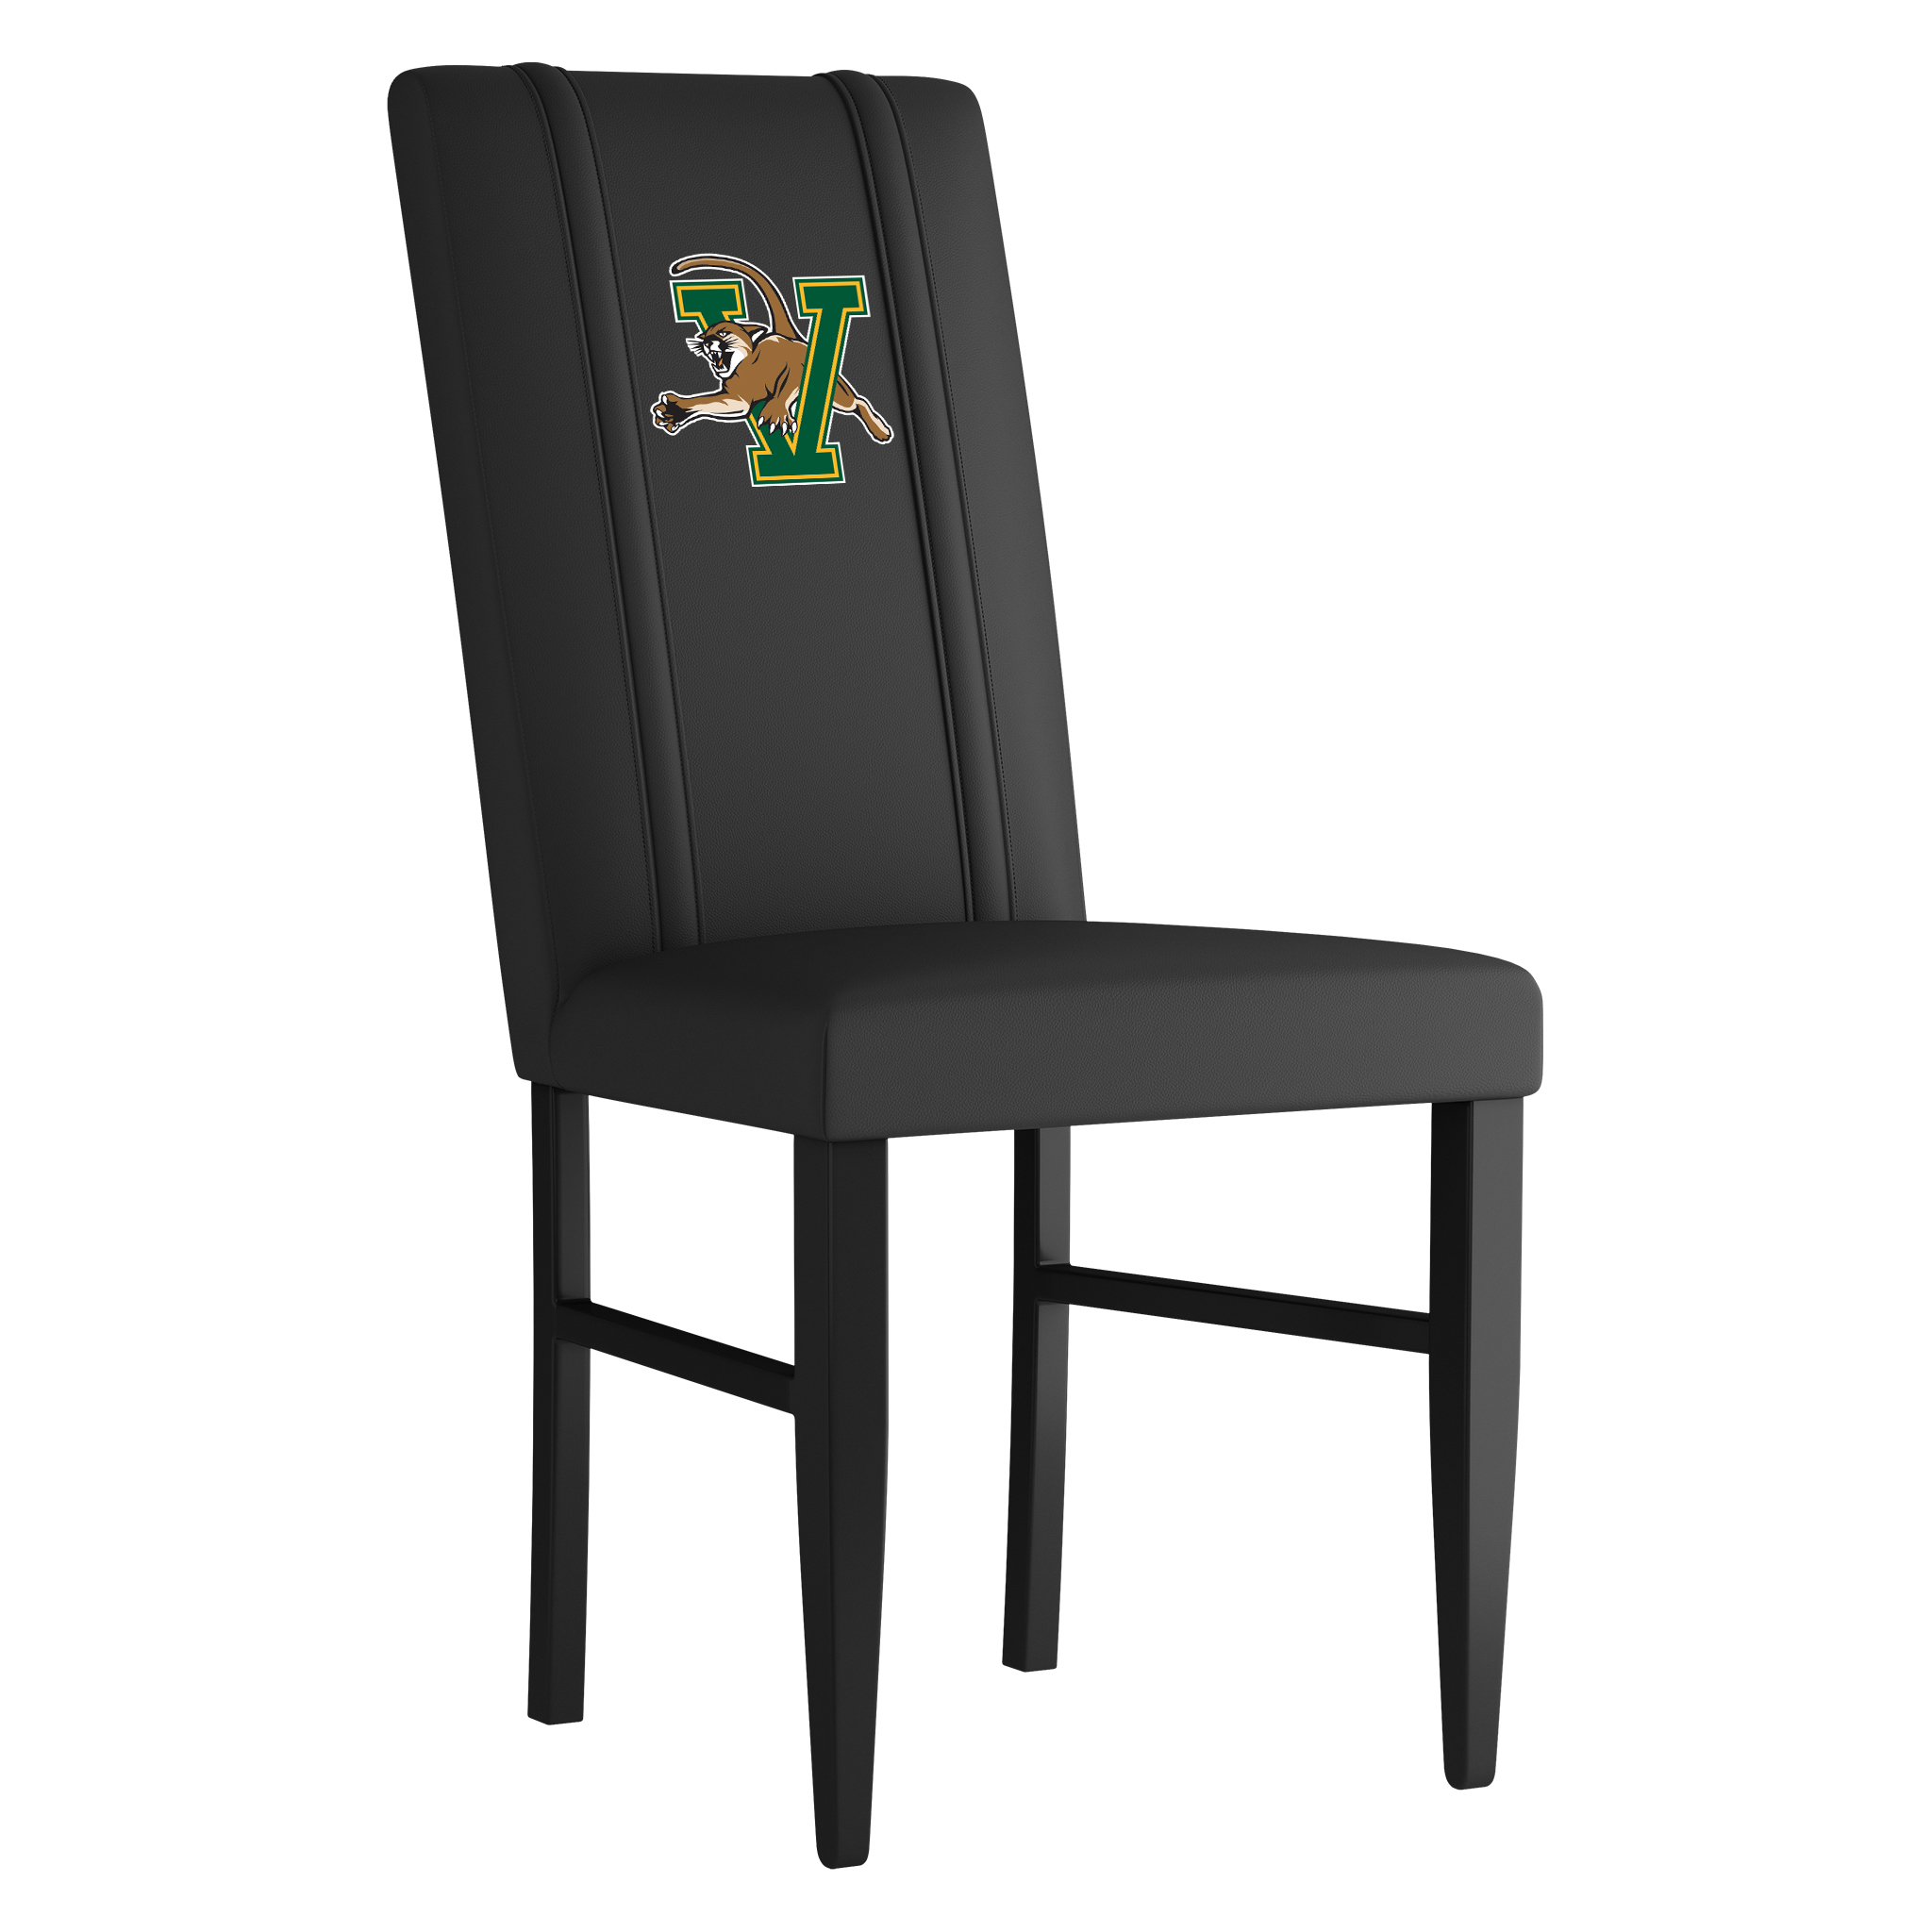 Vermont Catamounts Side Chair 2000 With Vermont Catamounts Logo